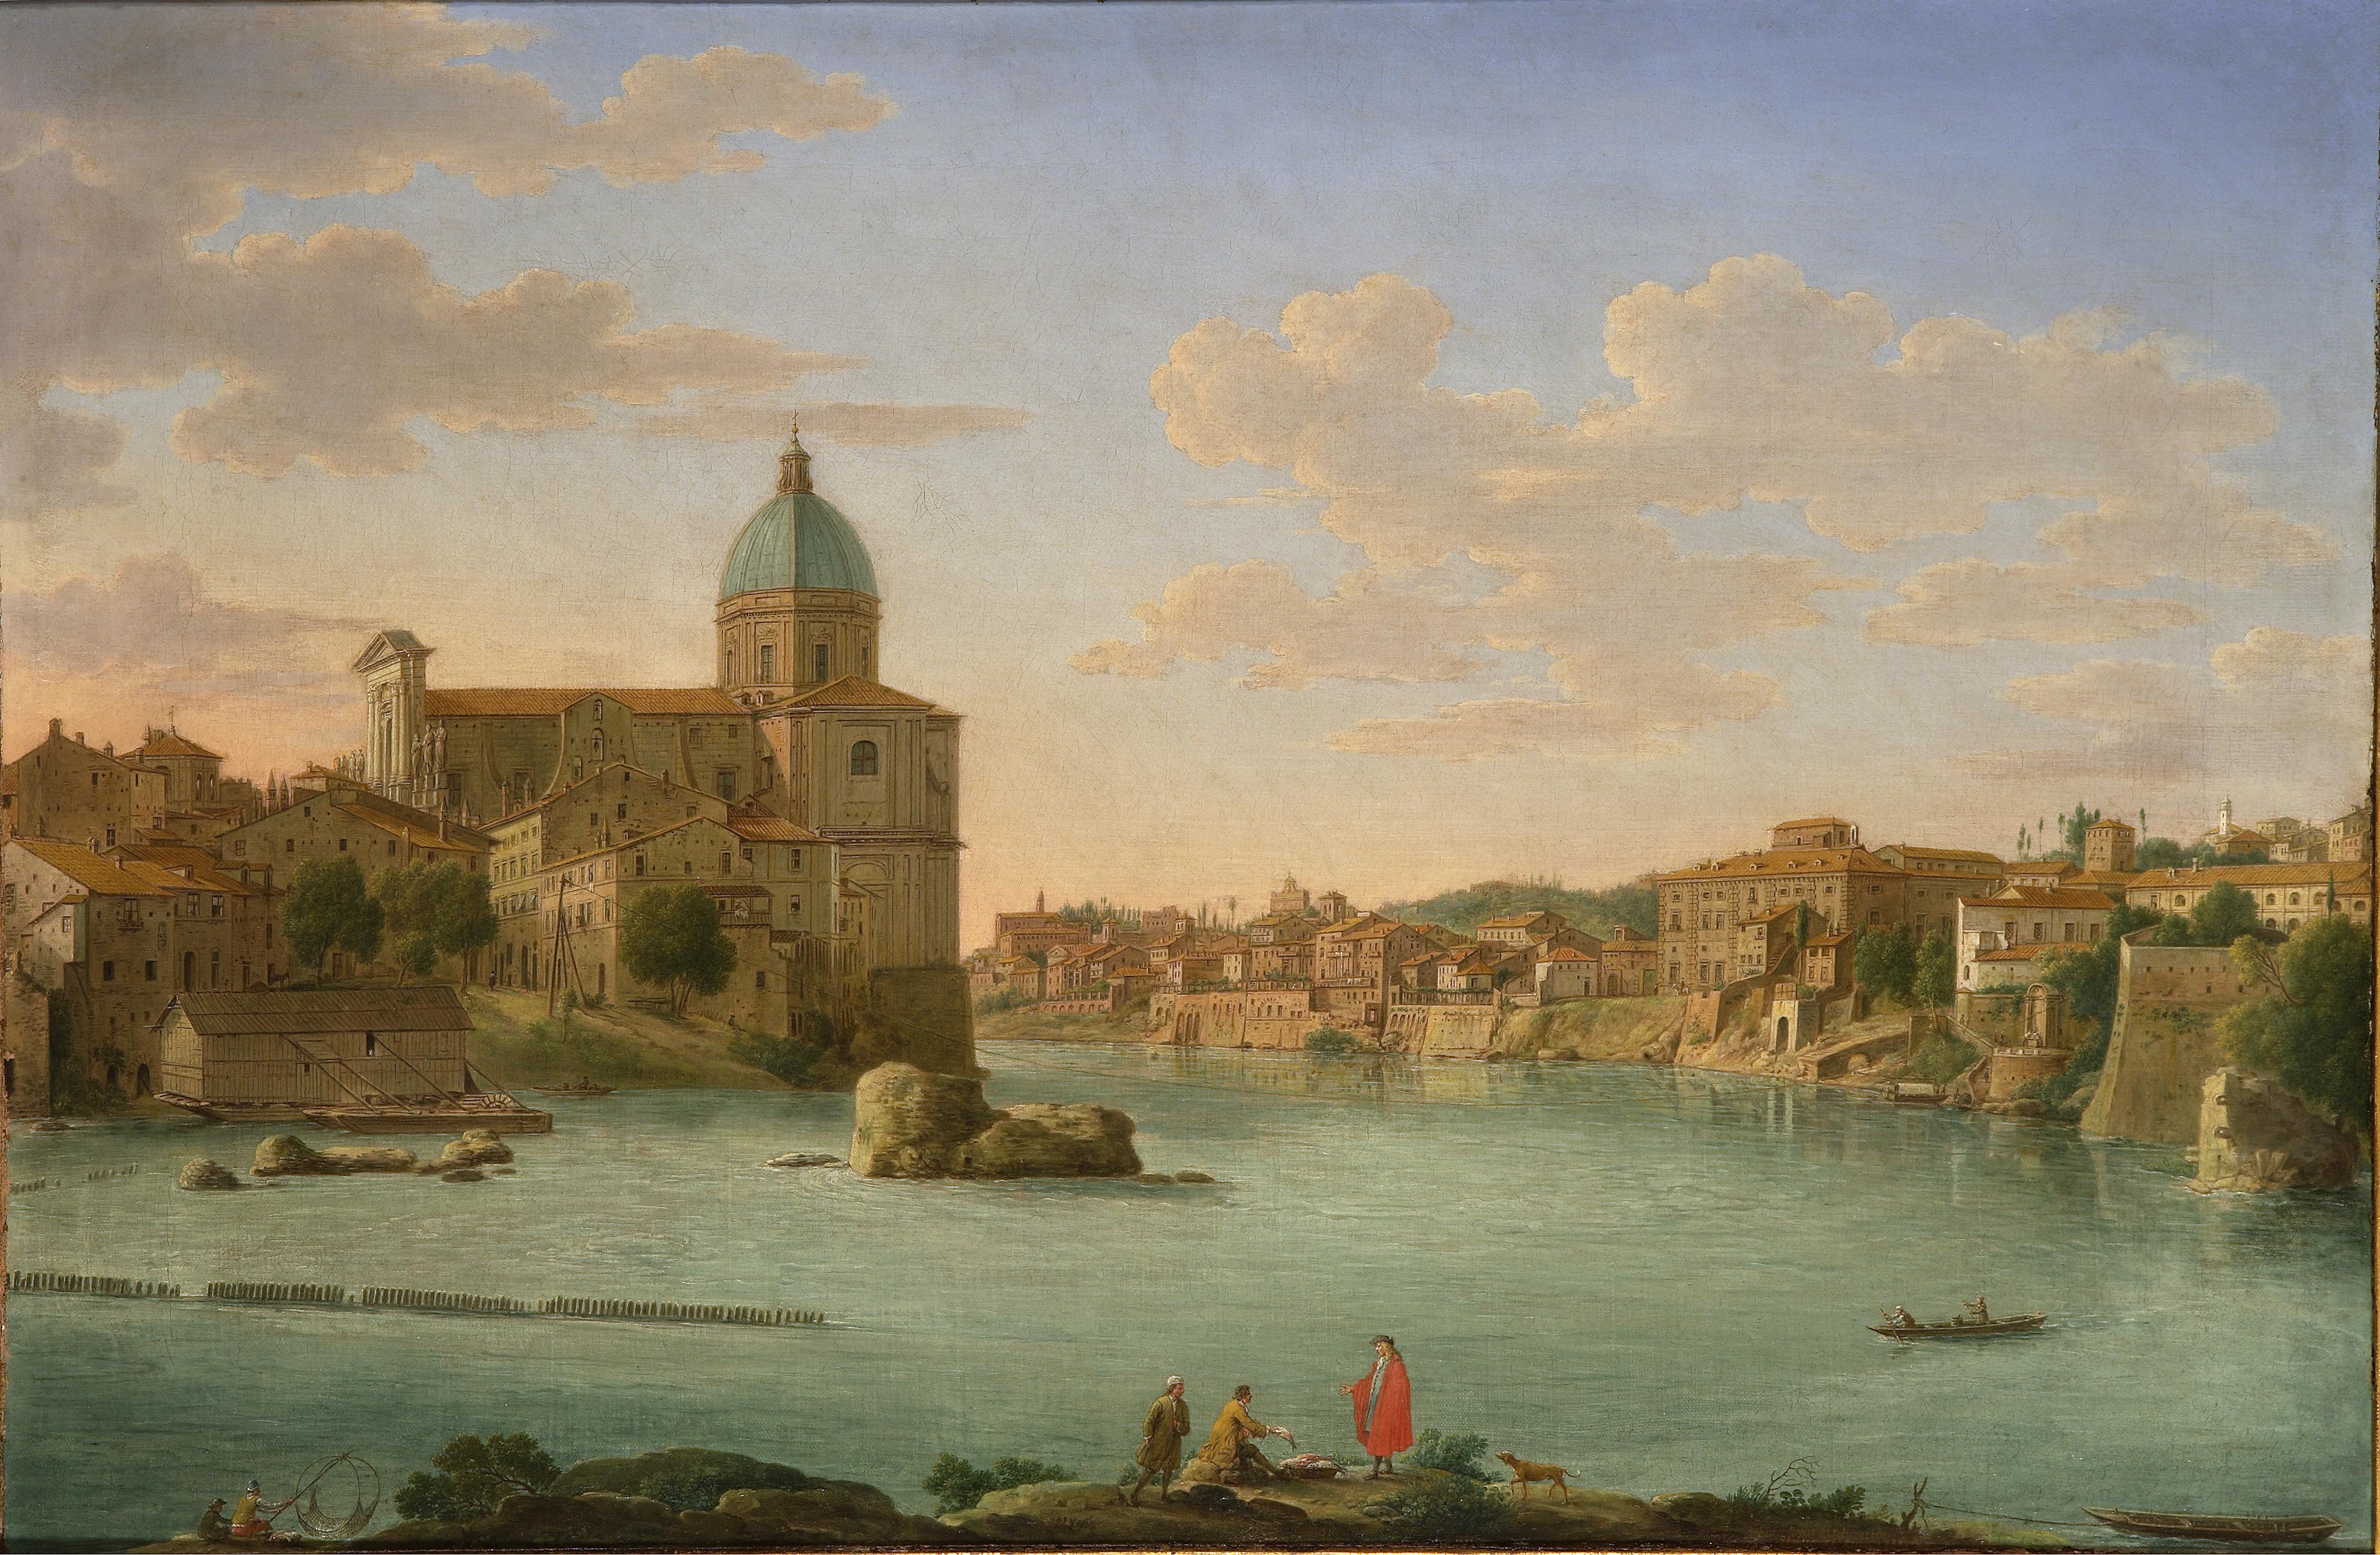 Hendrik Frans van Lint, View of the Monte Aventino in Rome, Utsikt över  Aventinen i Rom, painting, 1741, oil on canvas, Height, 24 cm (9.4 inch),  Width, 35 cm (13.7 inch), Inscriptions